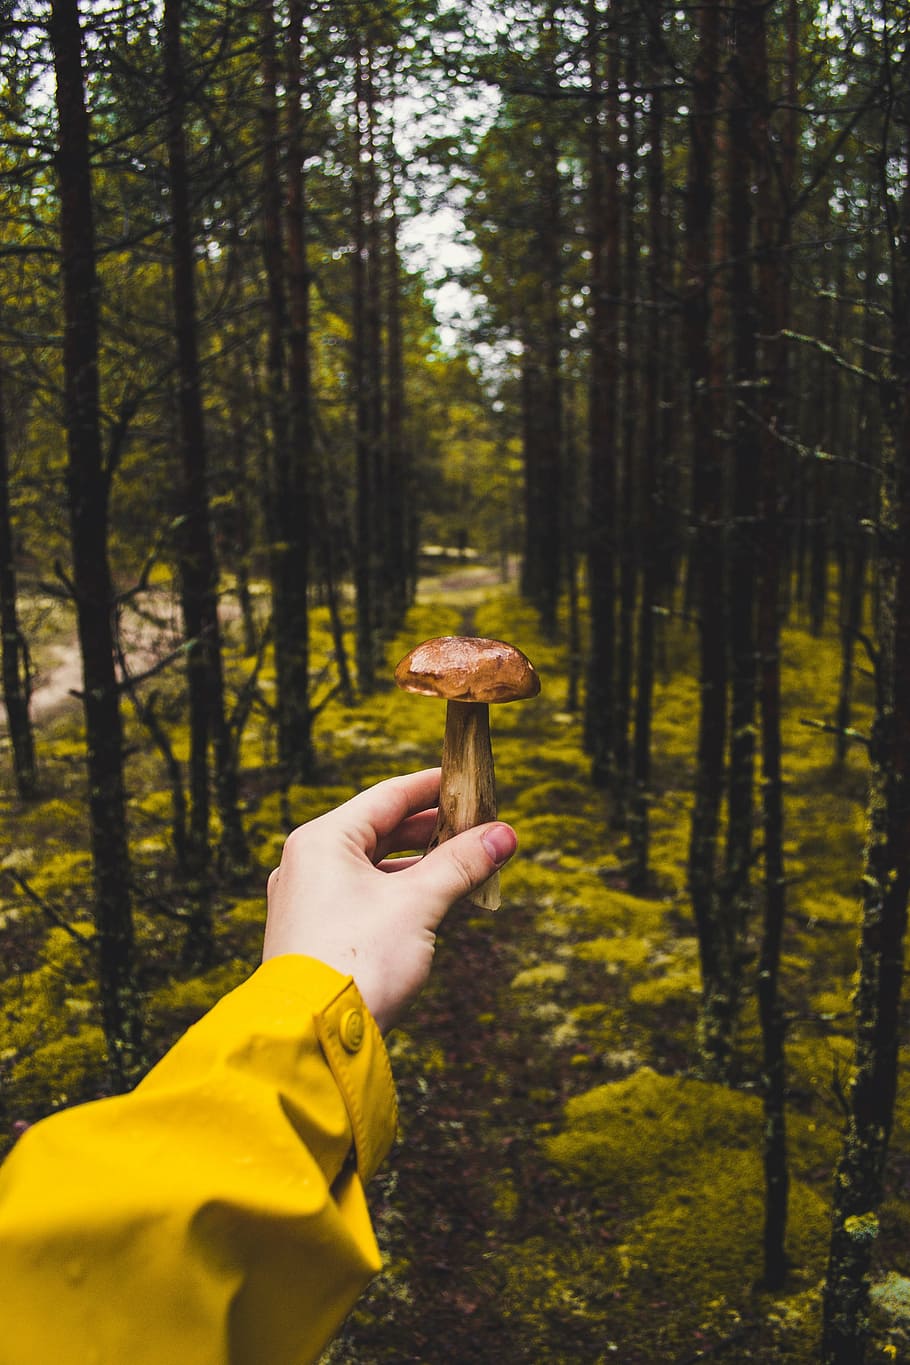 brown mushroom, first, person, point, view, holding, mushroom, woods, green, grass